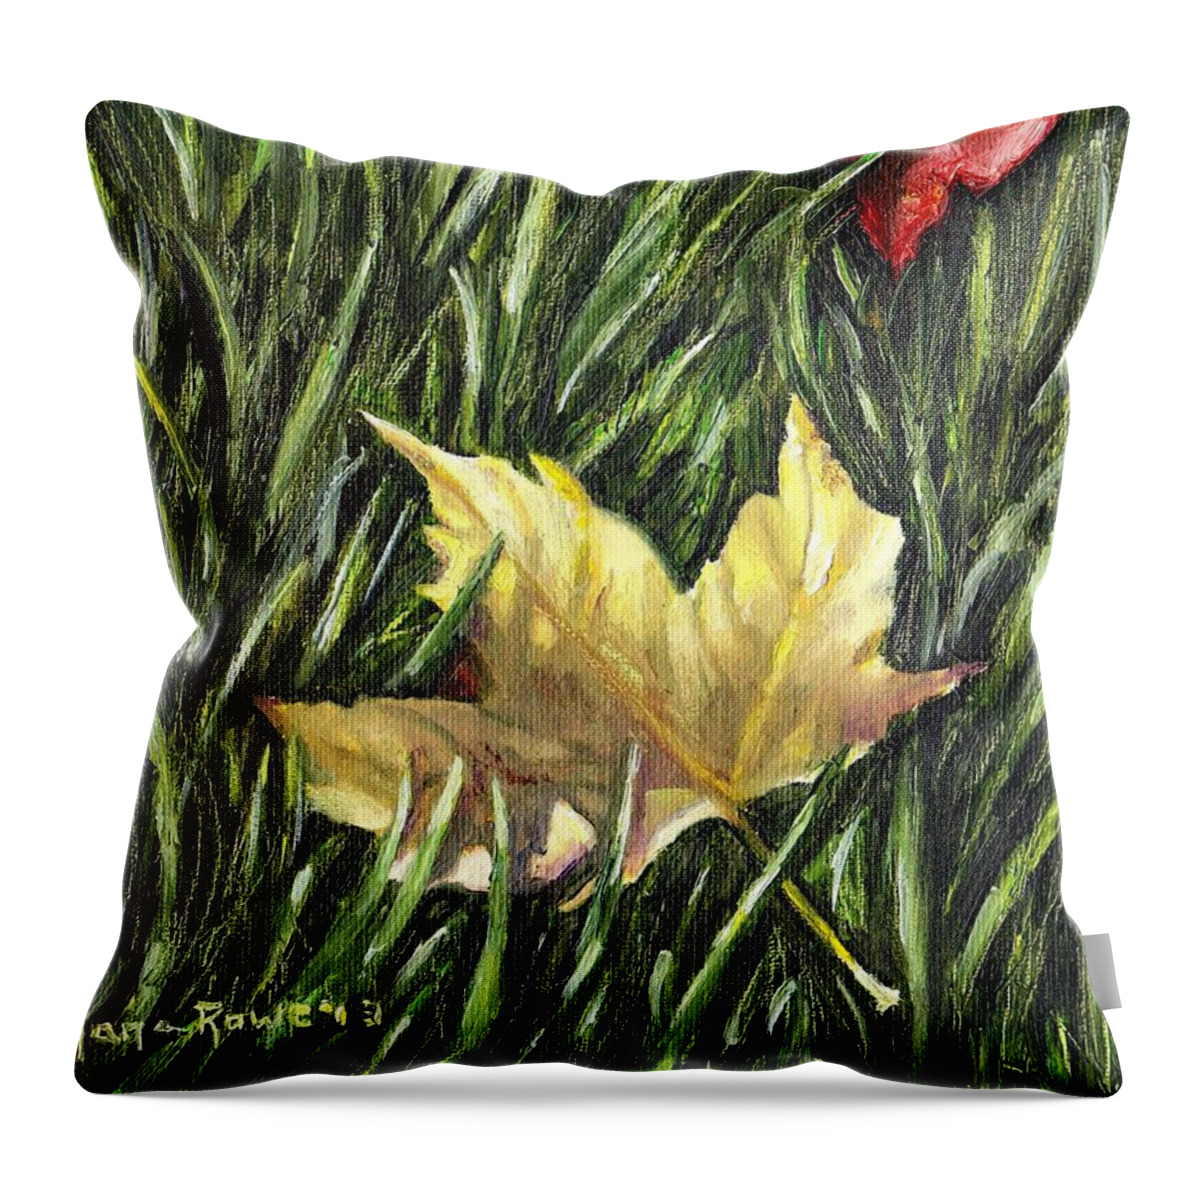 Fall Throw Pillow featuring the painting Fallen from Grace by Shana Rowe Jackson